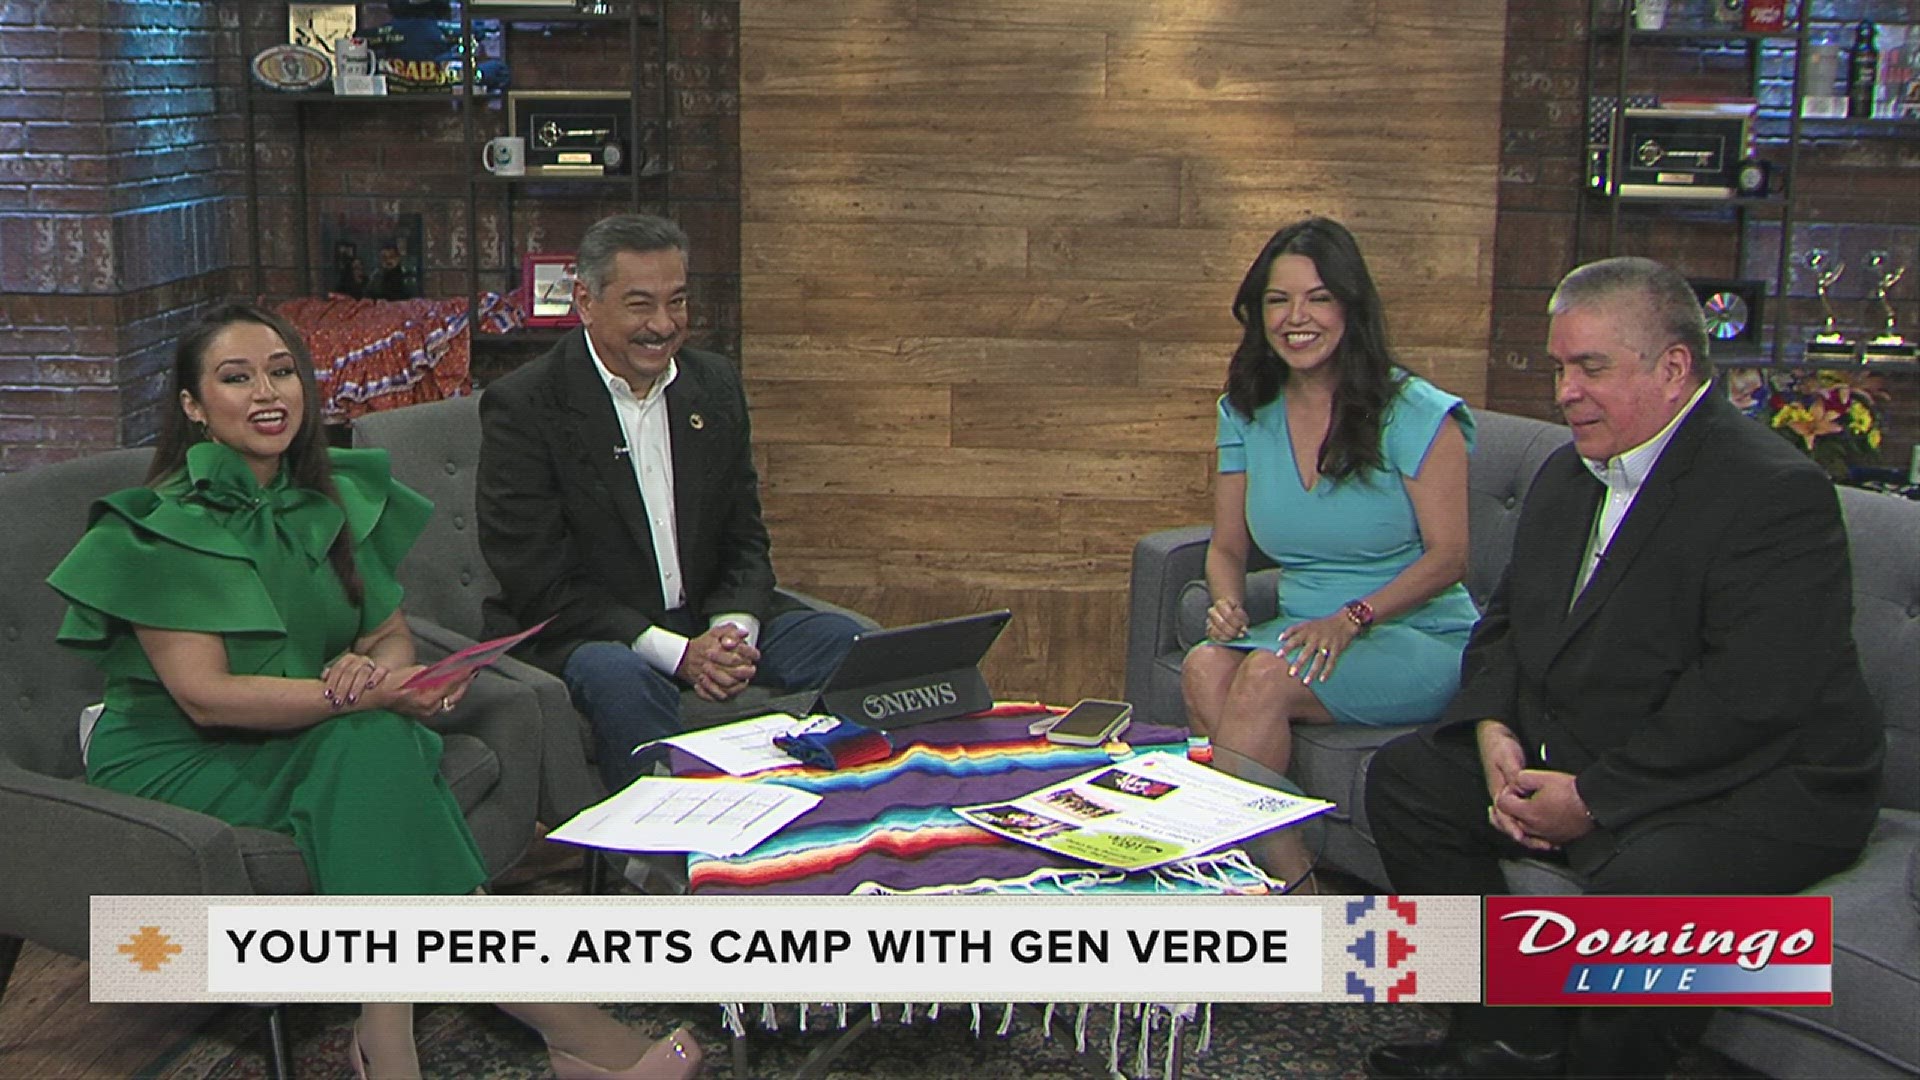 Diocese of Corpus Christi's Katia Uriarte and Jesse DeLeon joined us on Domingo Live to encourage area kids to register for a Youth Performing Arts Camp Oct. 11-15.